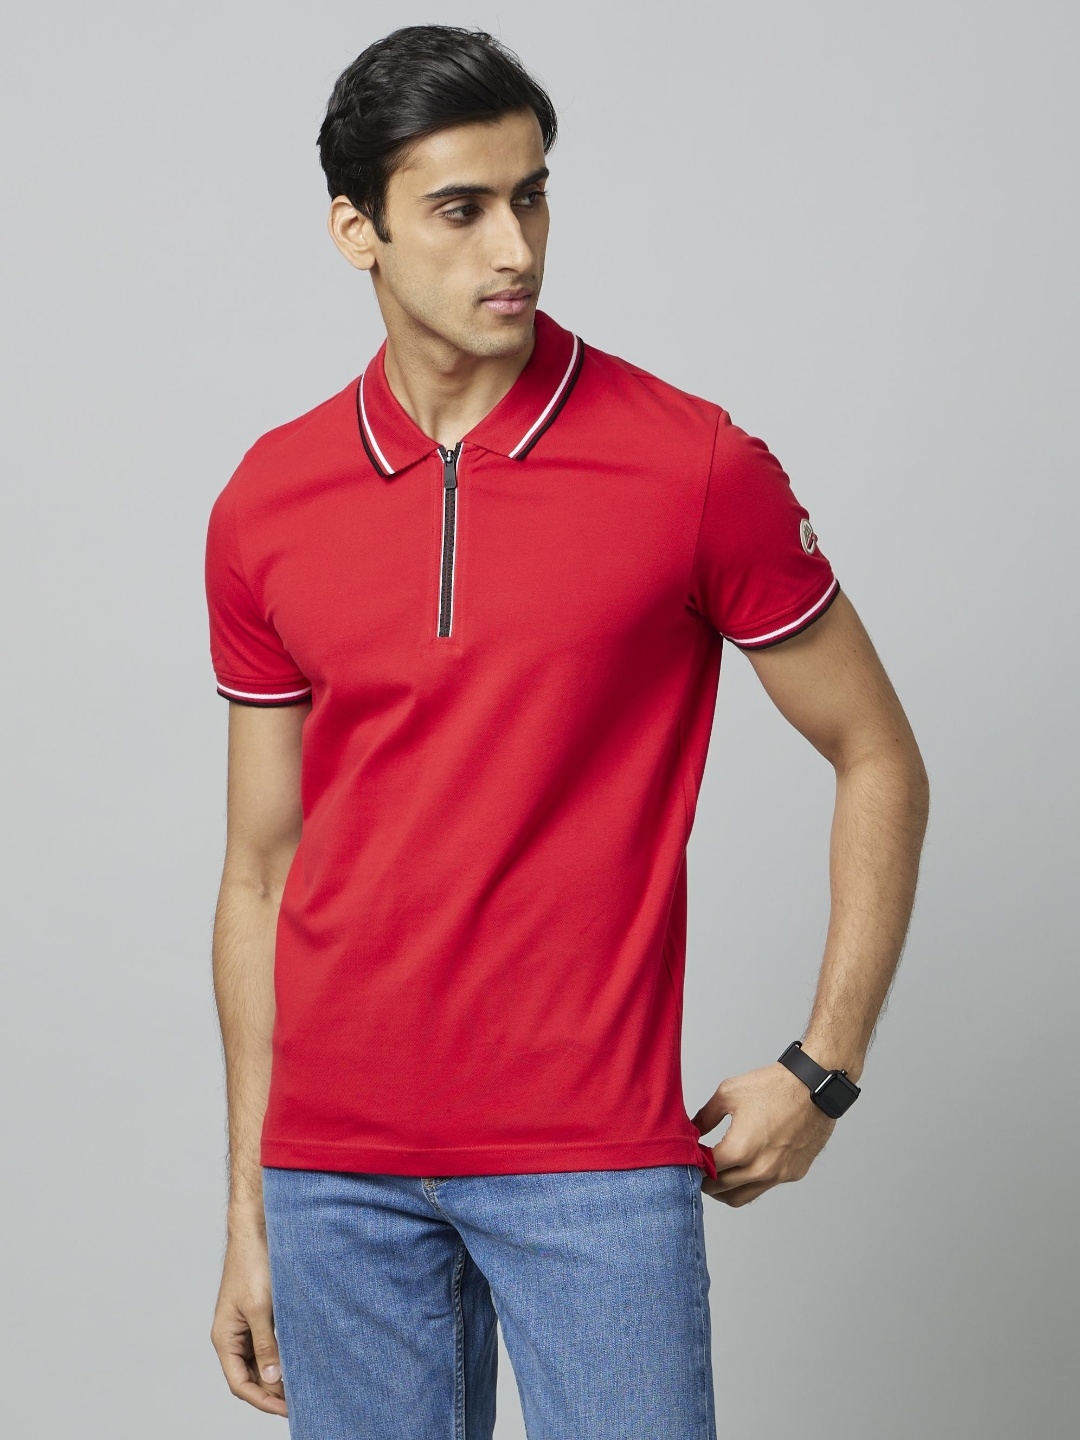 Chamonix Solid Red Short Sleeves Polo